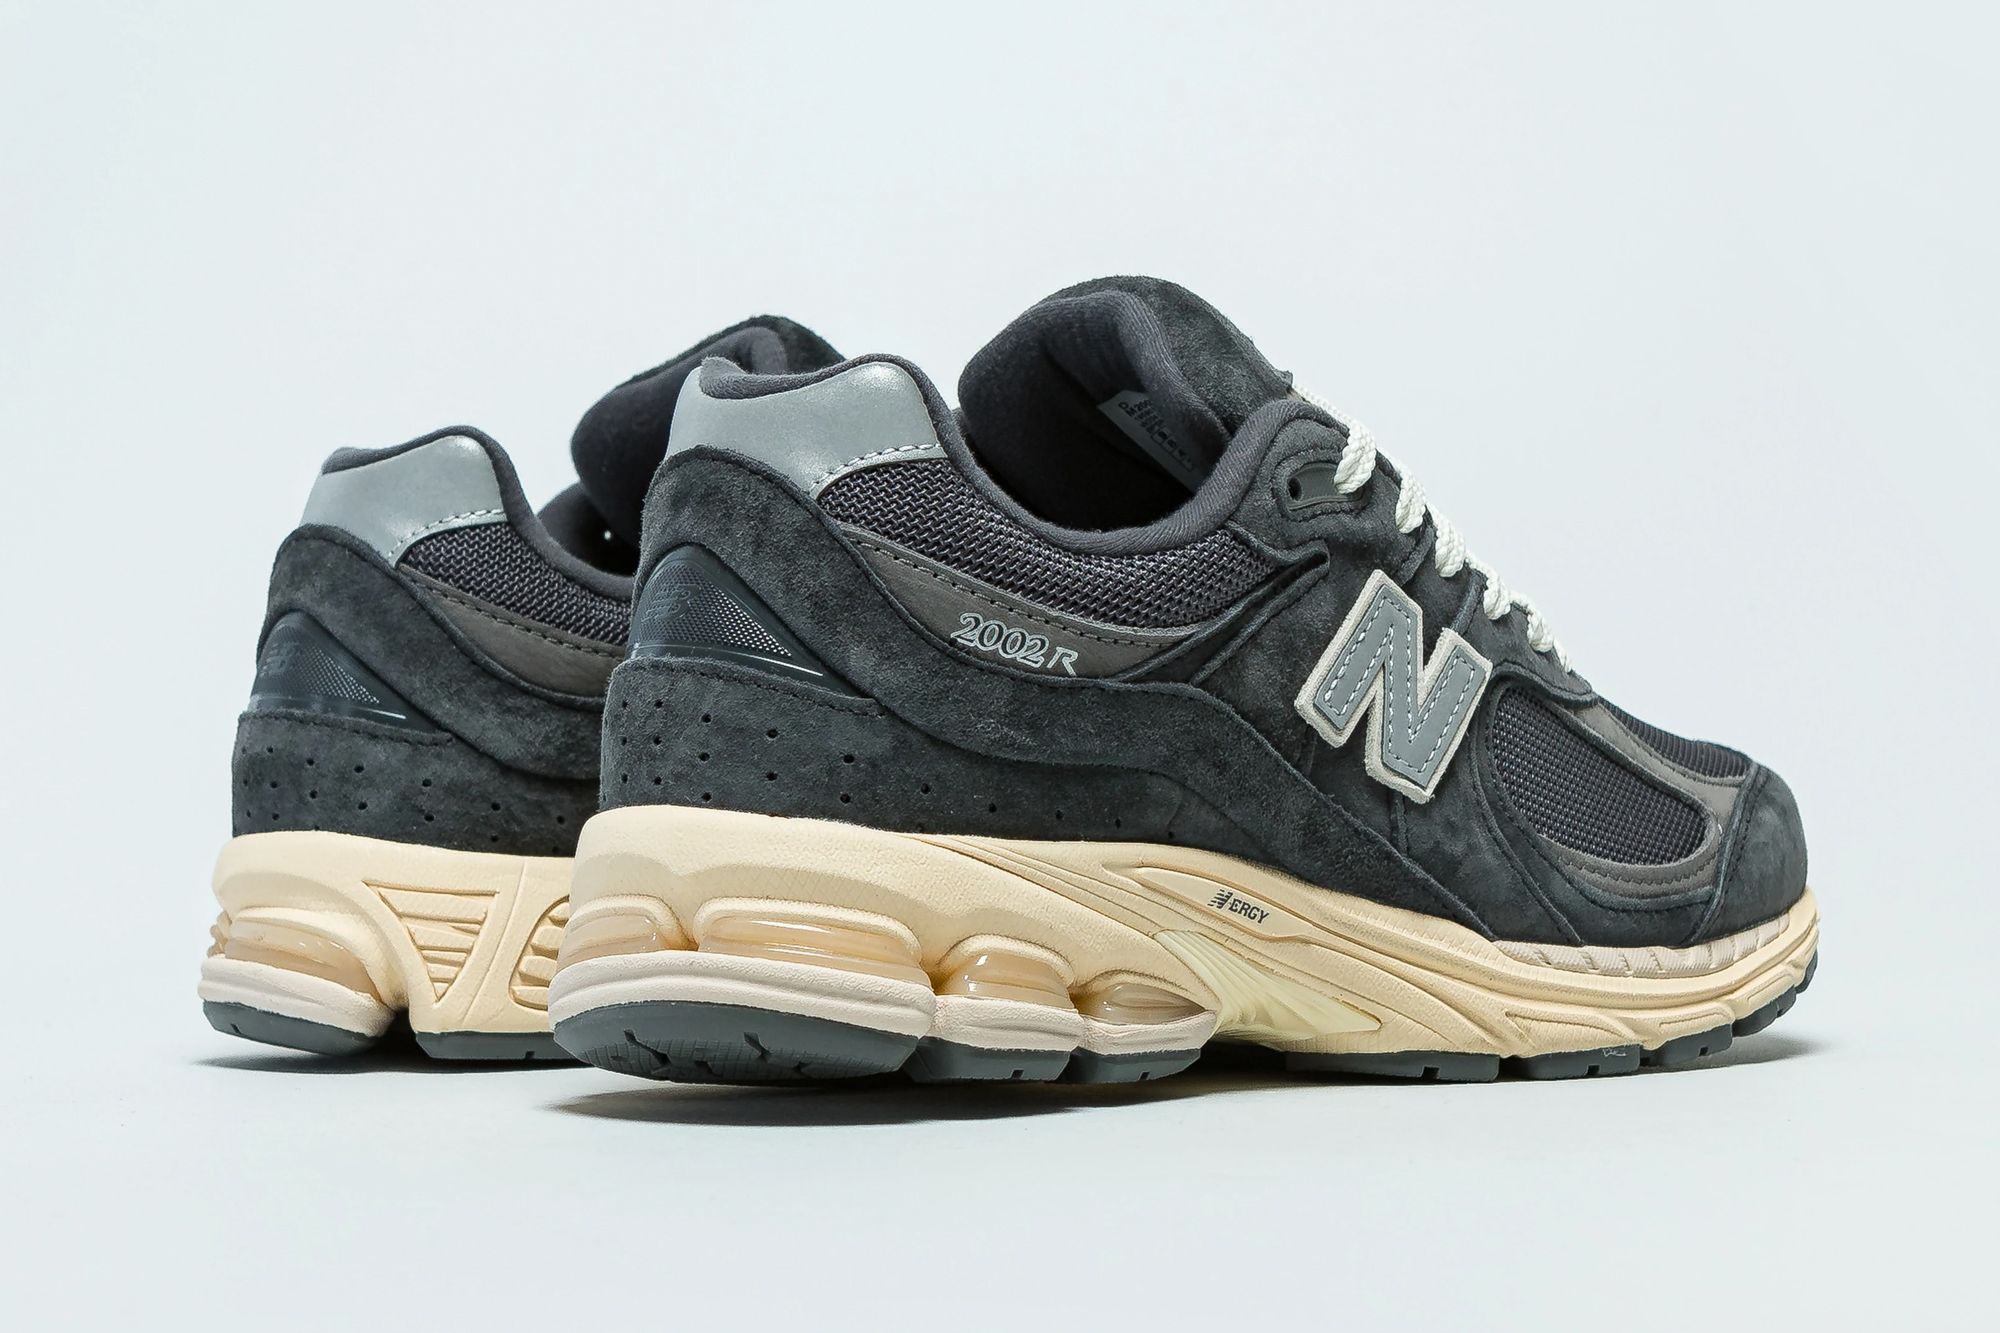 New Balance 2002R Charcoal Suede